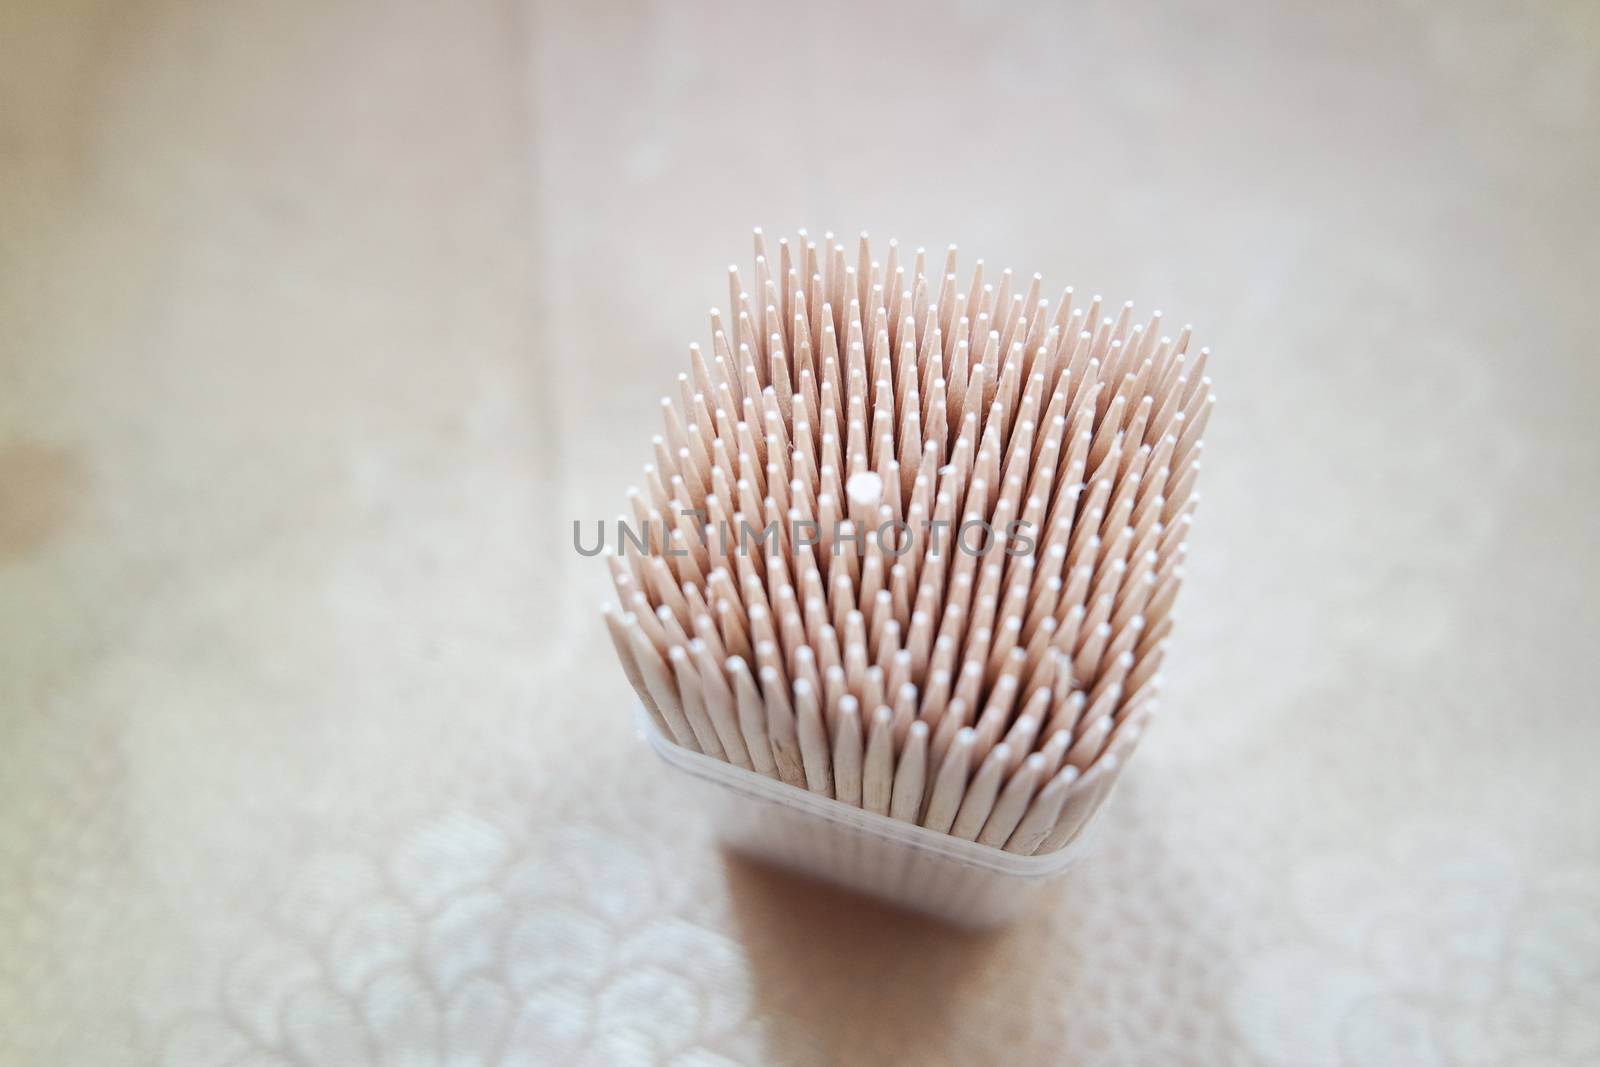 High angle top view of wood needles or wooden tooth picks arranged in a white plastic box container